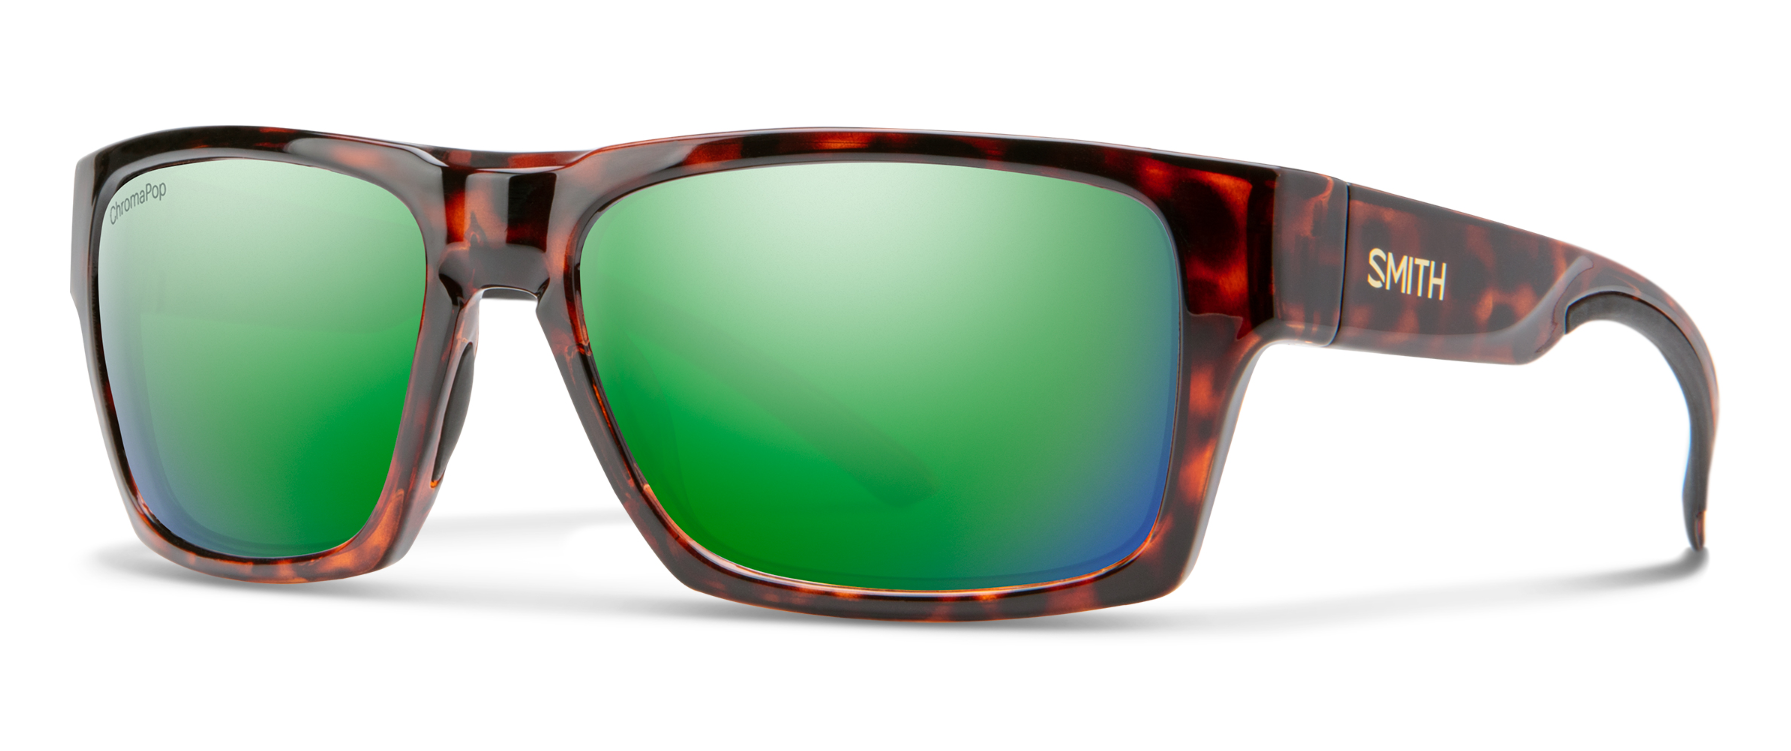 smith outlier 2 running sunglasses in tortoise with green mirror lenses